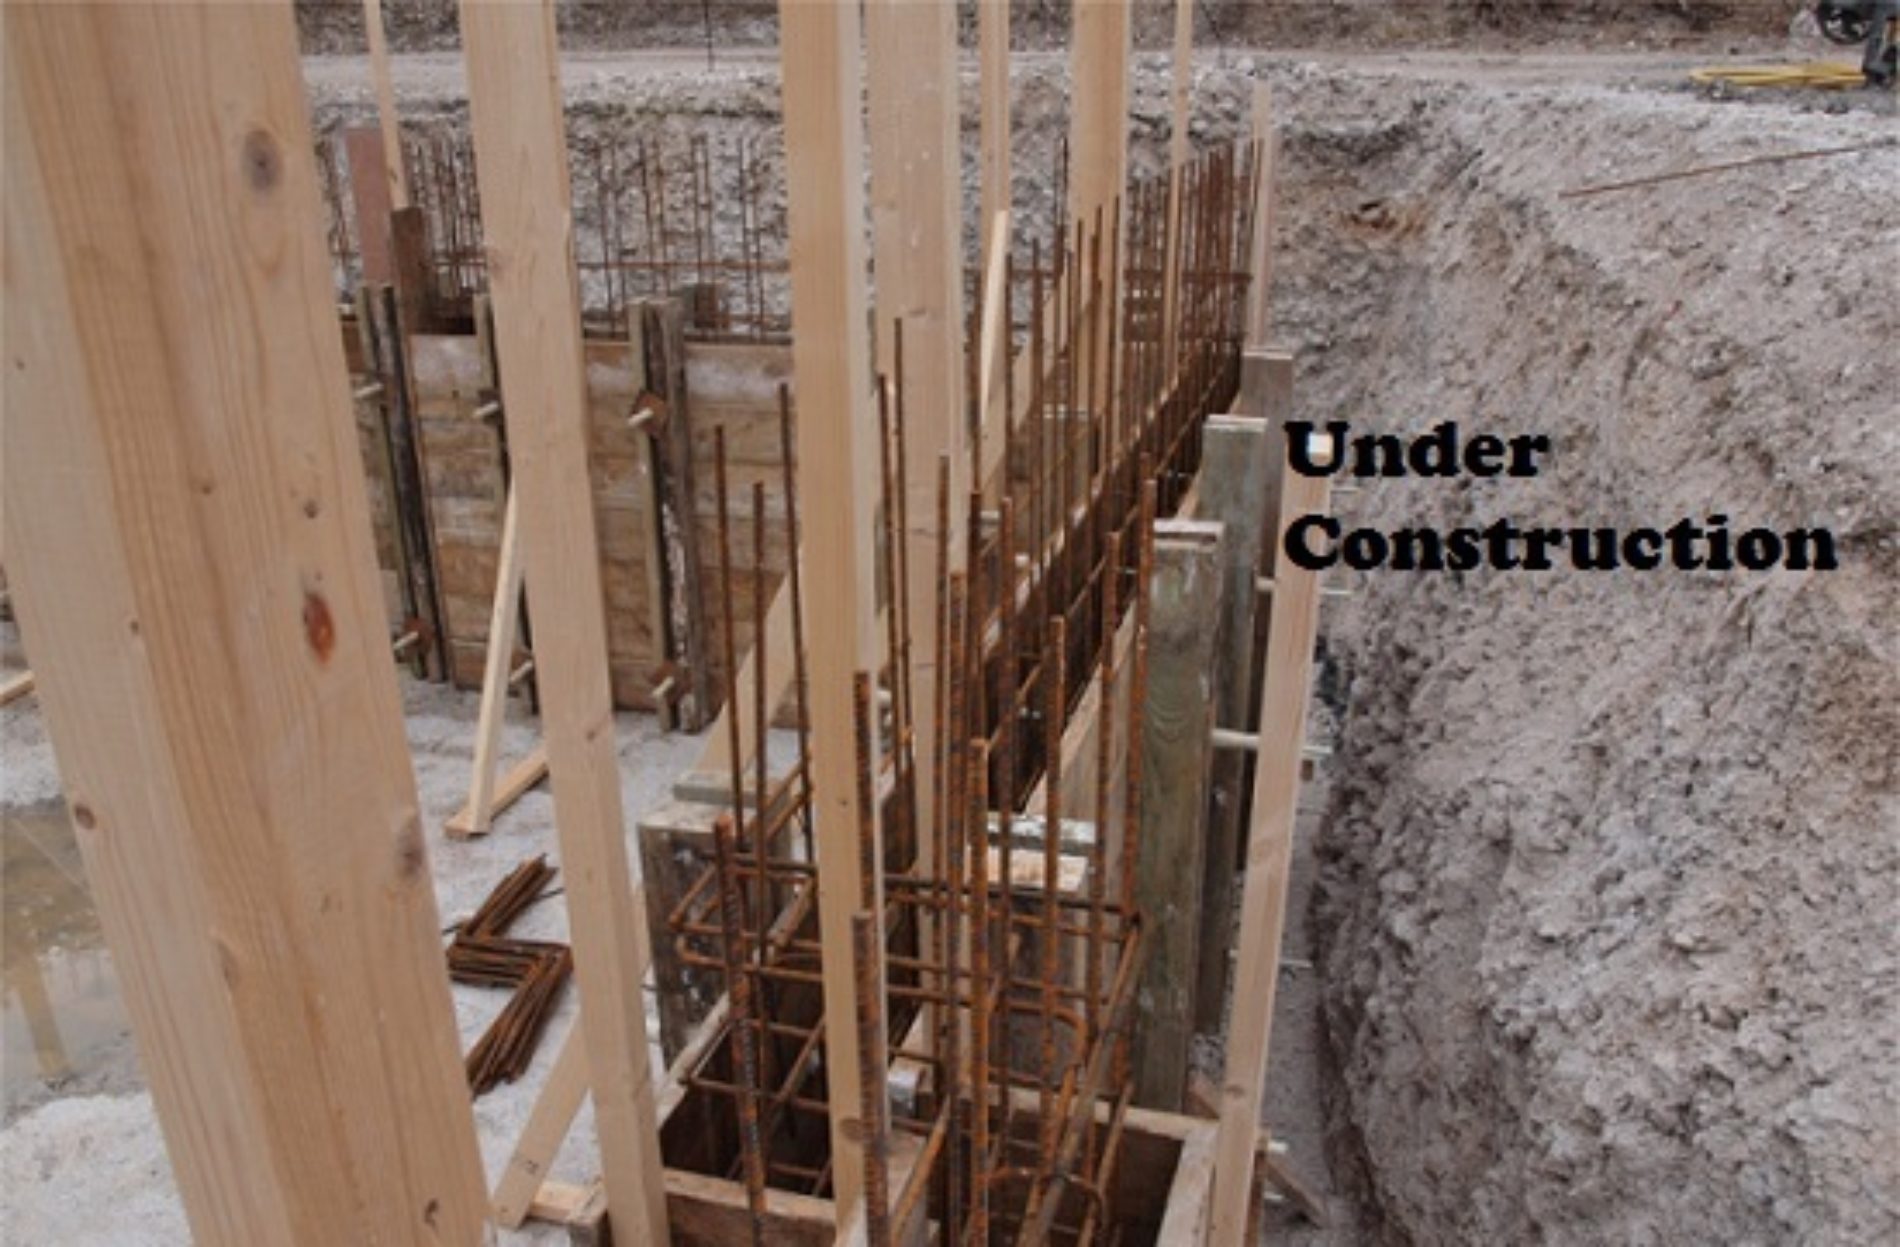 Under Construction: Twenty-Two and Counting